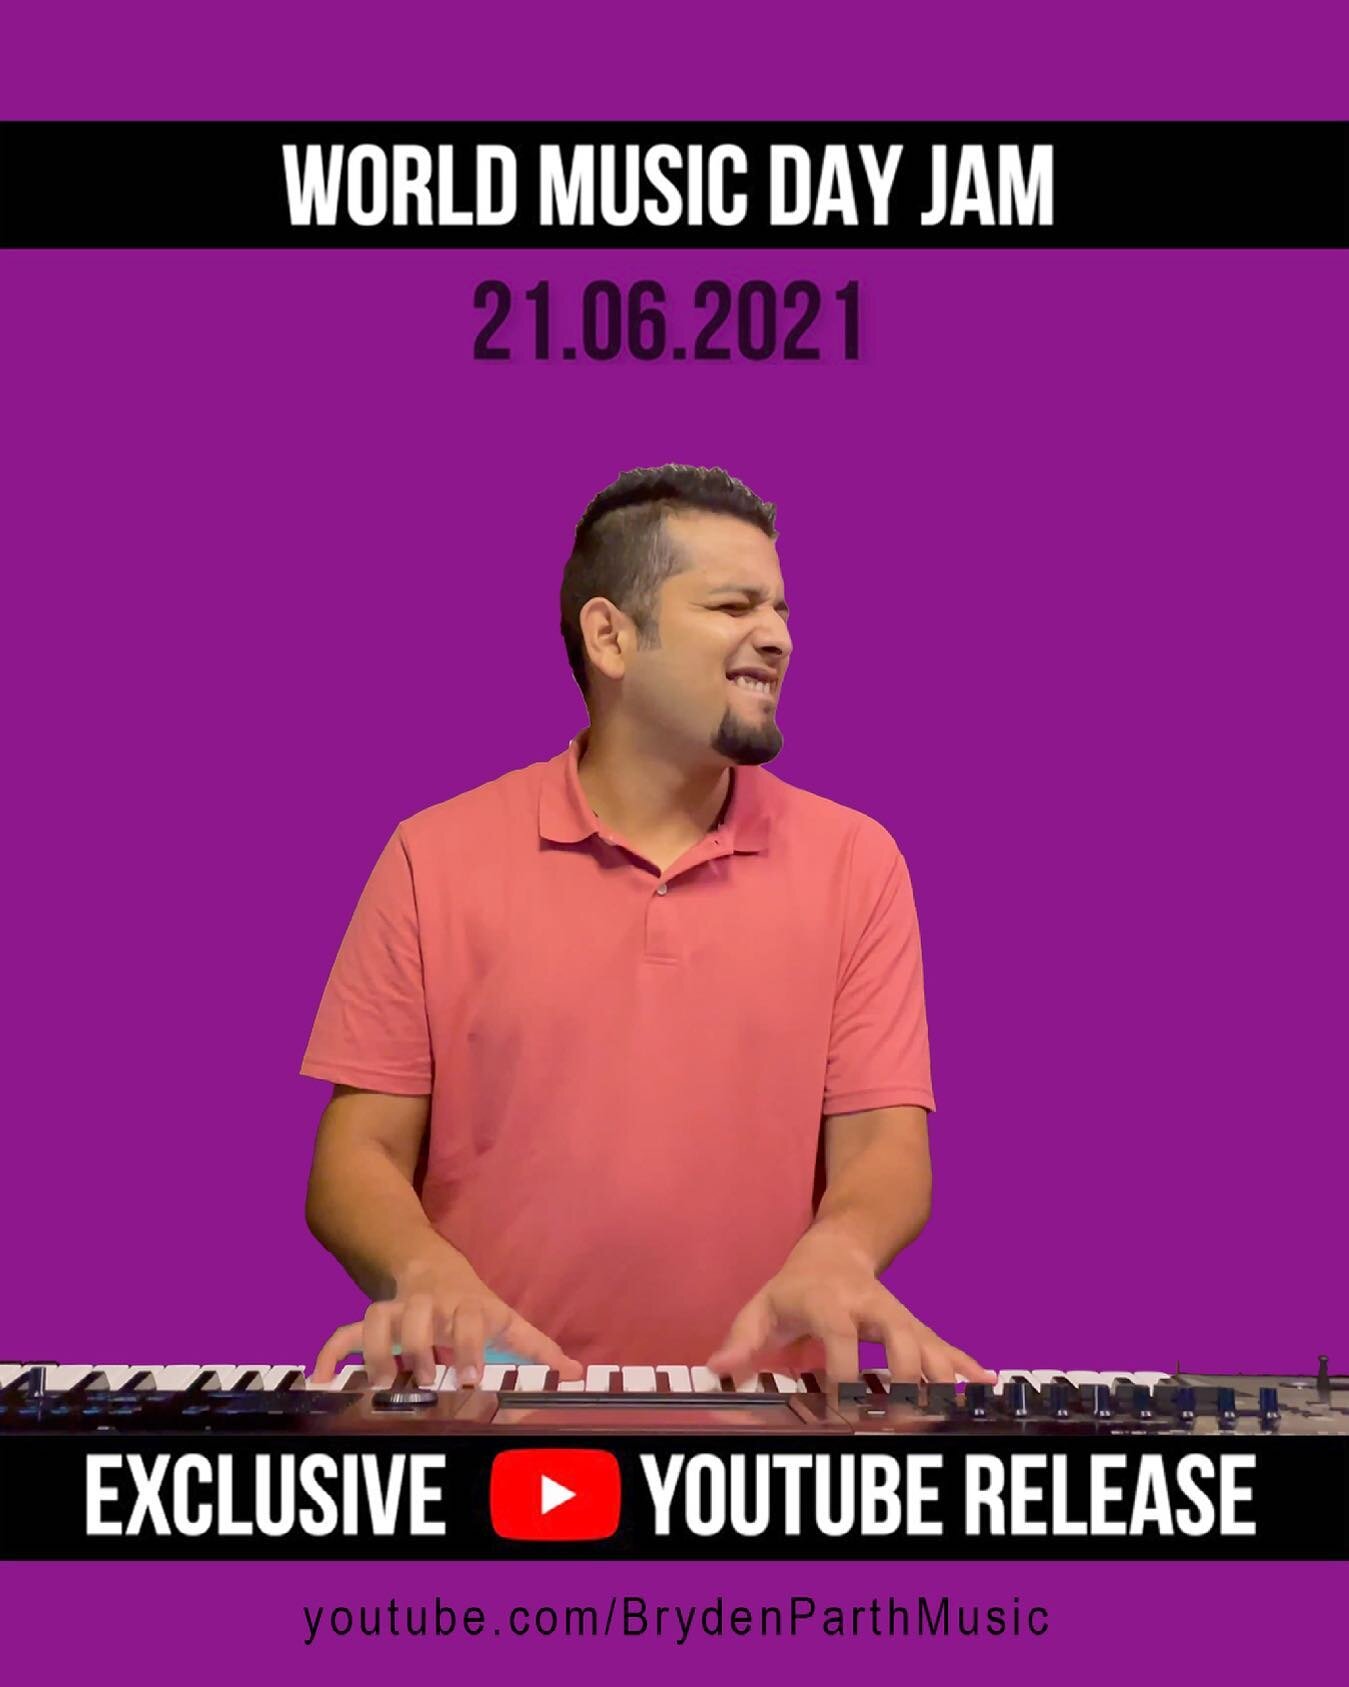 @siddhartkamath is here with that expression to tell you that Monday mornings just got a lot more exciting than Sunday mornings 😂

Well, Monday the 21st of June anyway because we&rsquo;re celebrating World Music Day by dropping a brand new cover at 